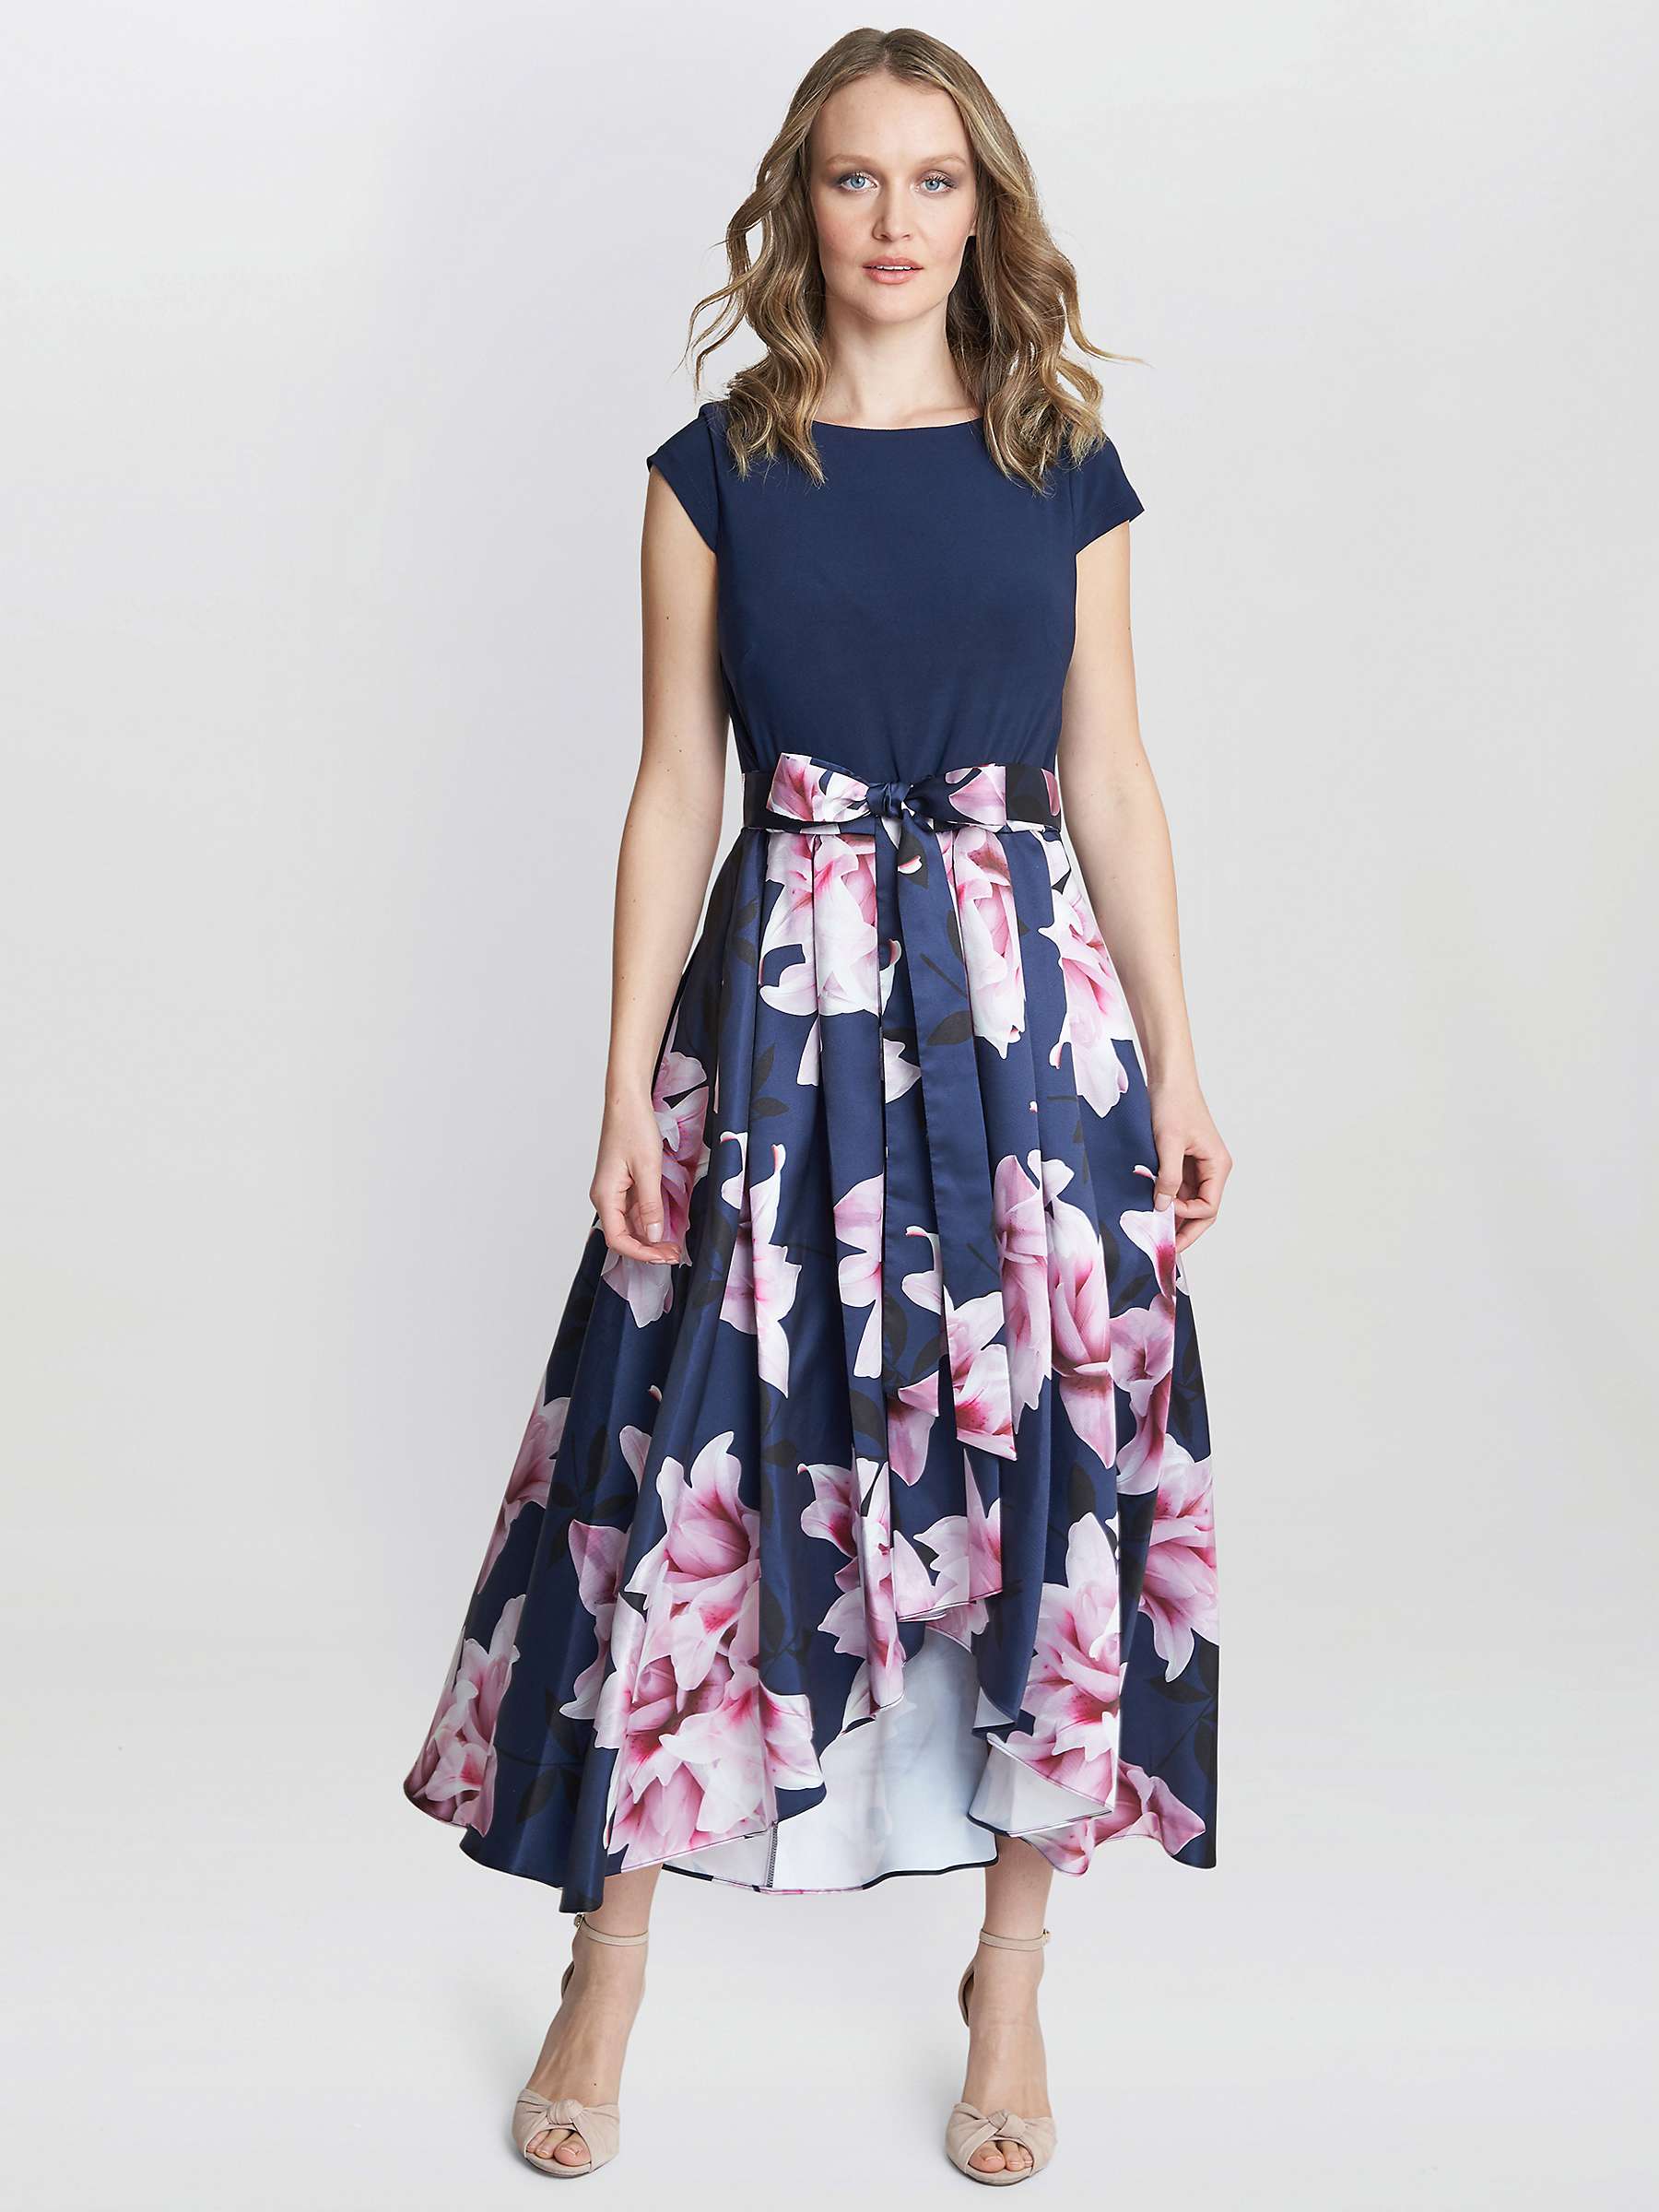 Buy Gina Bacconi Billie Printed High Low Dress With Tie Belt, Navy/Multi Online at johnlewis.com